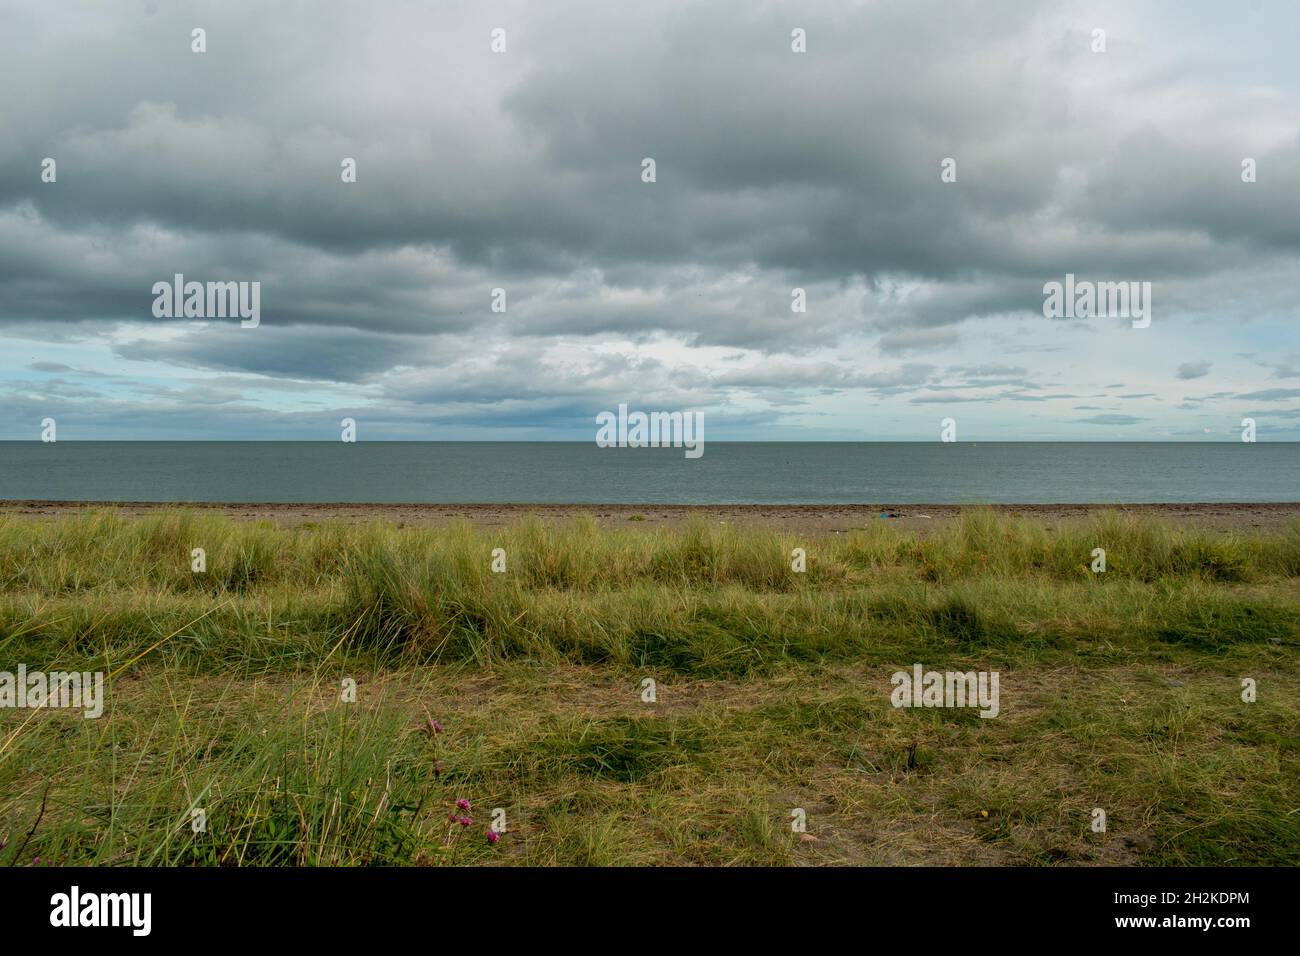 South Beach, Greystones, Co Wicklow, Ireland on a clam, cloudy, September day Stock Photo